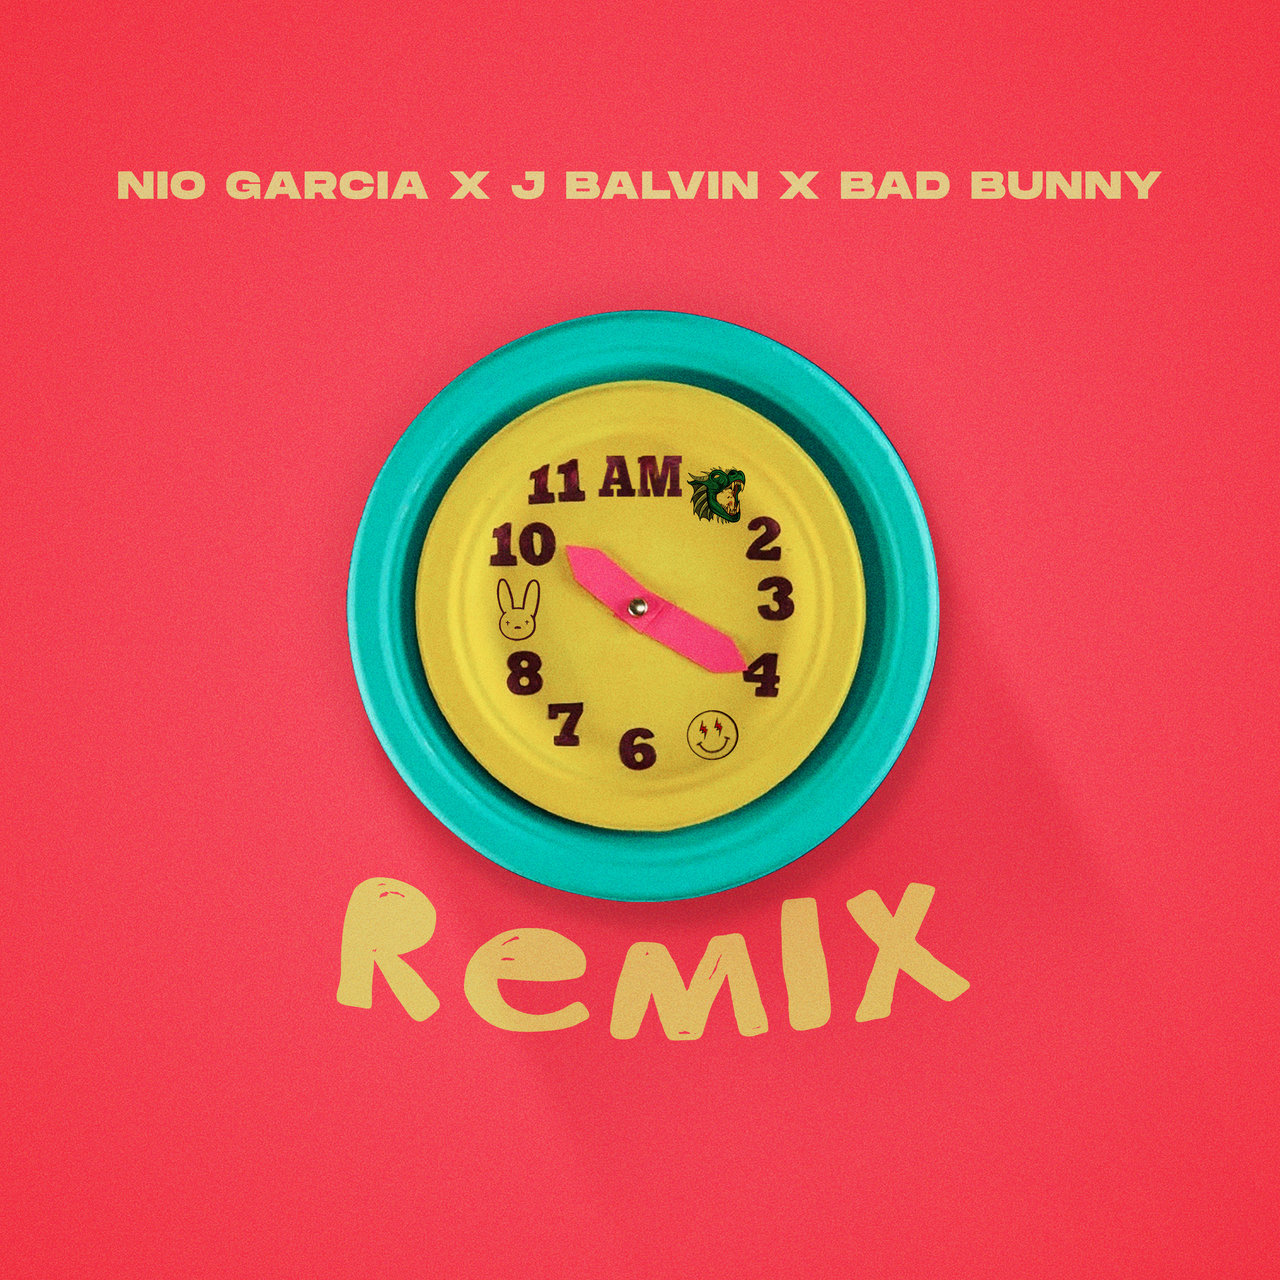 Nio Garcia - AM (Remix) (ft. J Balvin and Bad Bunny) (Cover)